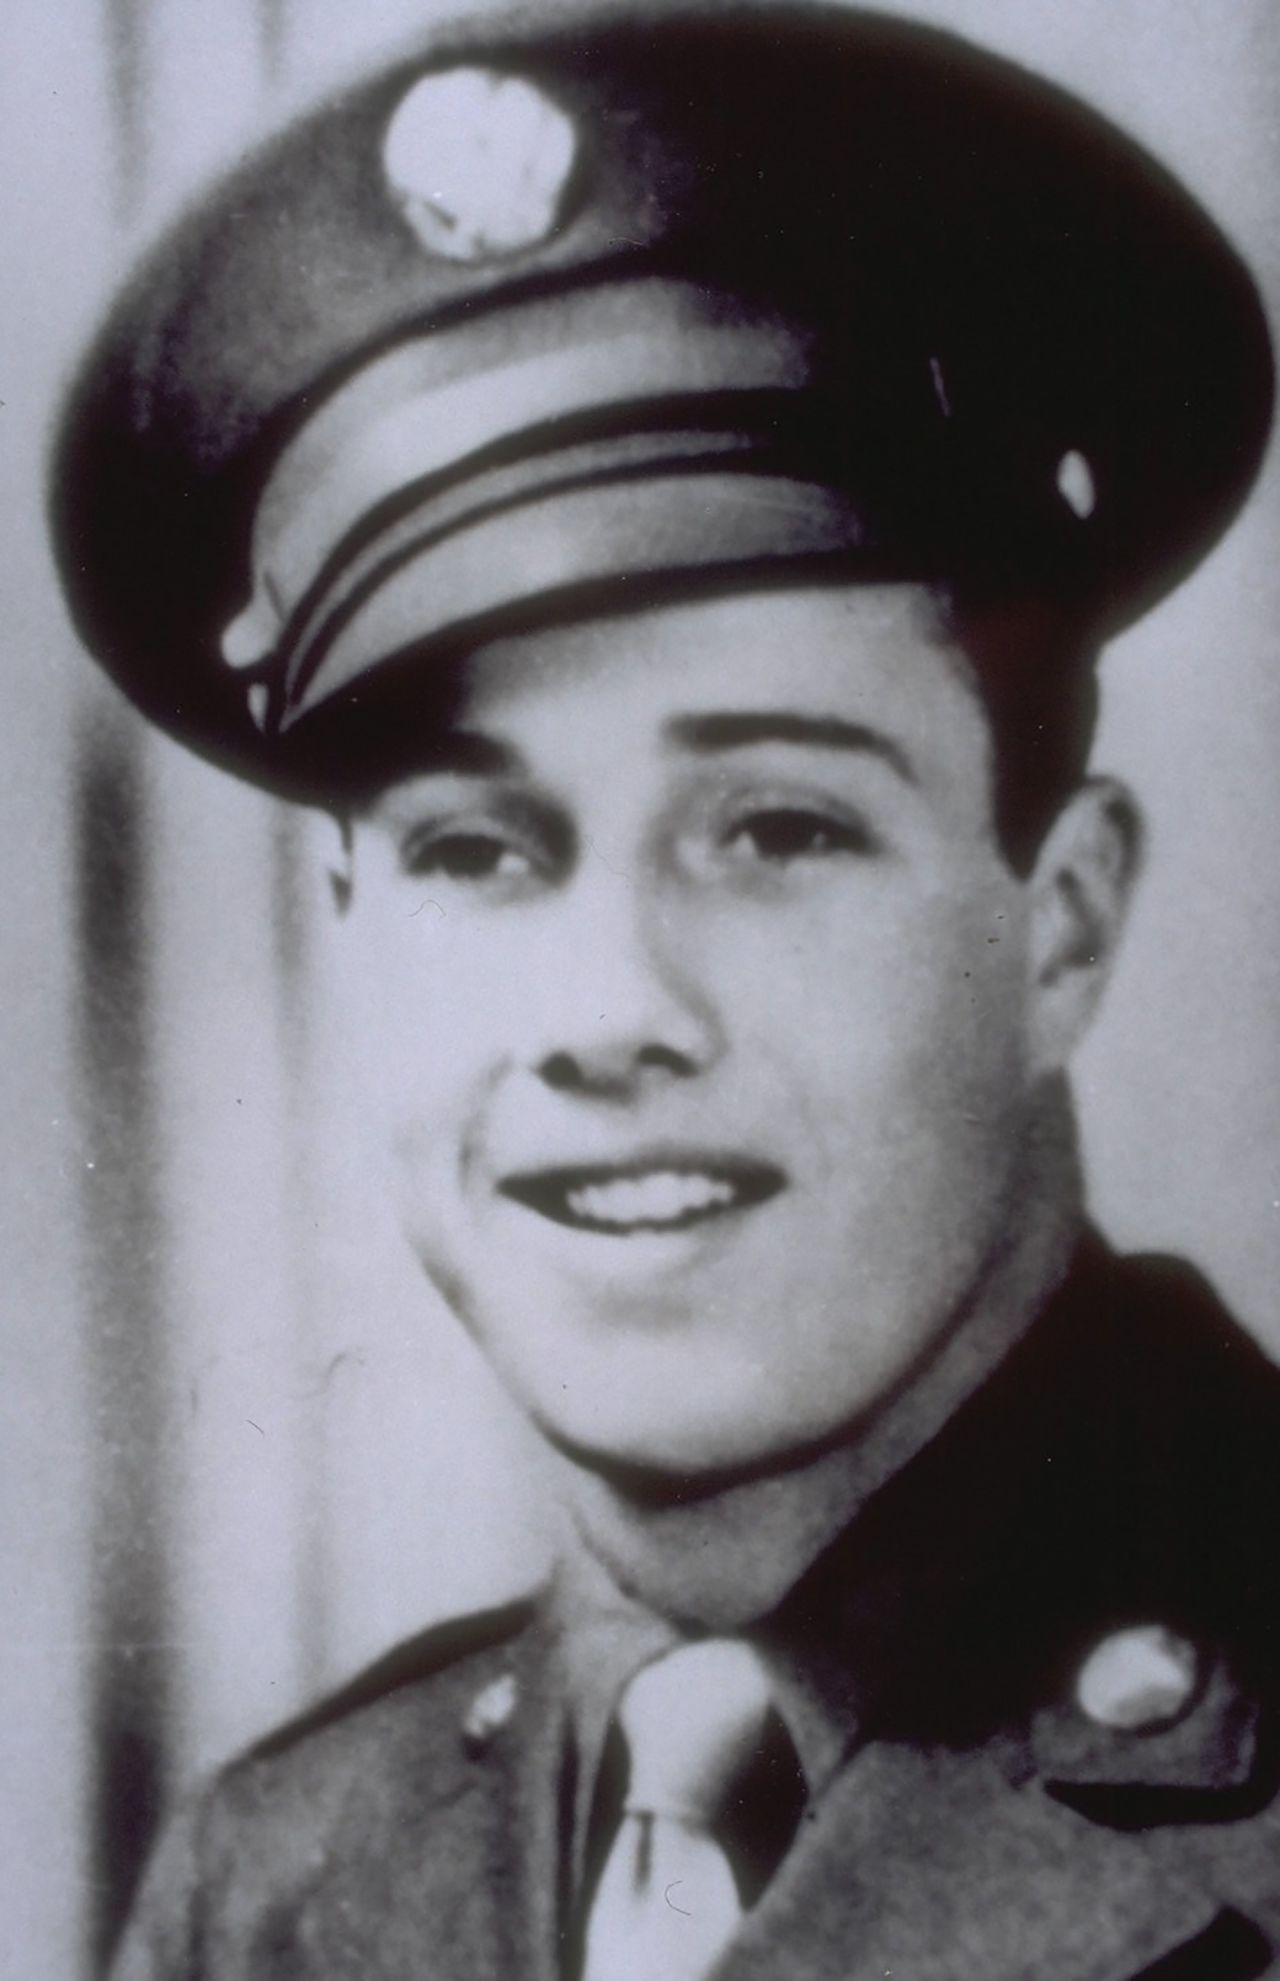 Dole enlisted in the US Army during World War II.